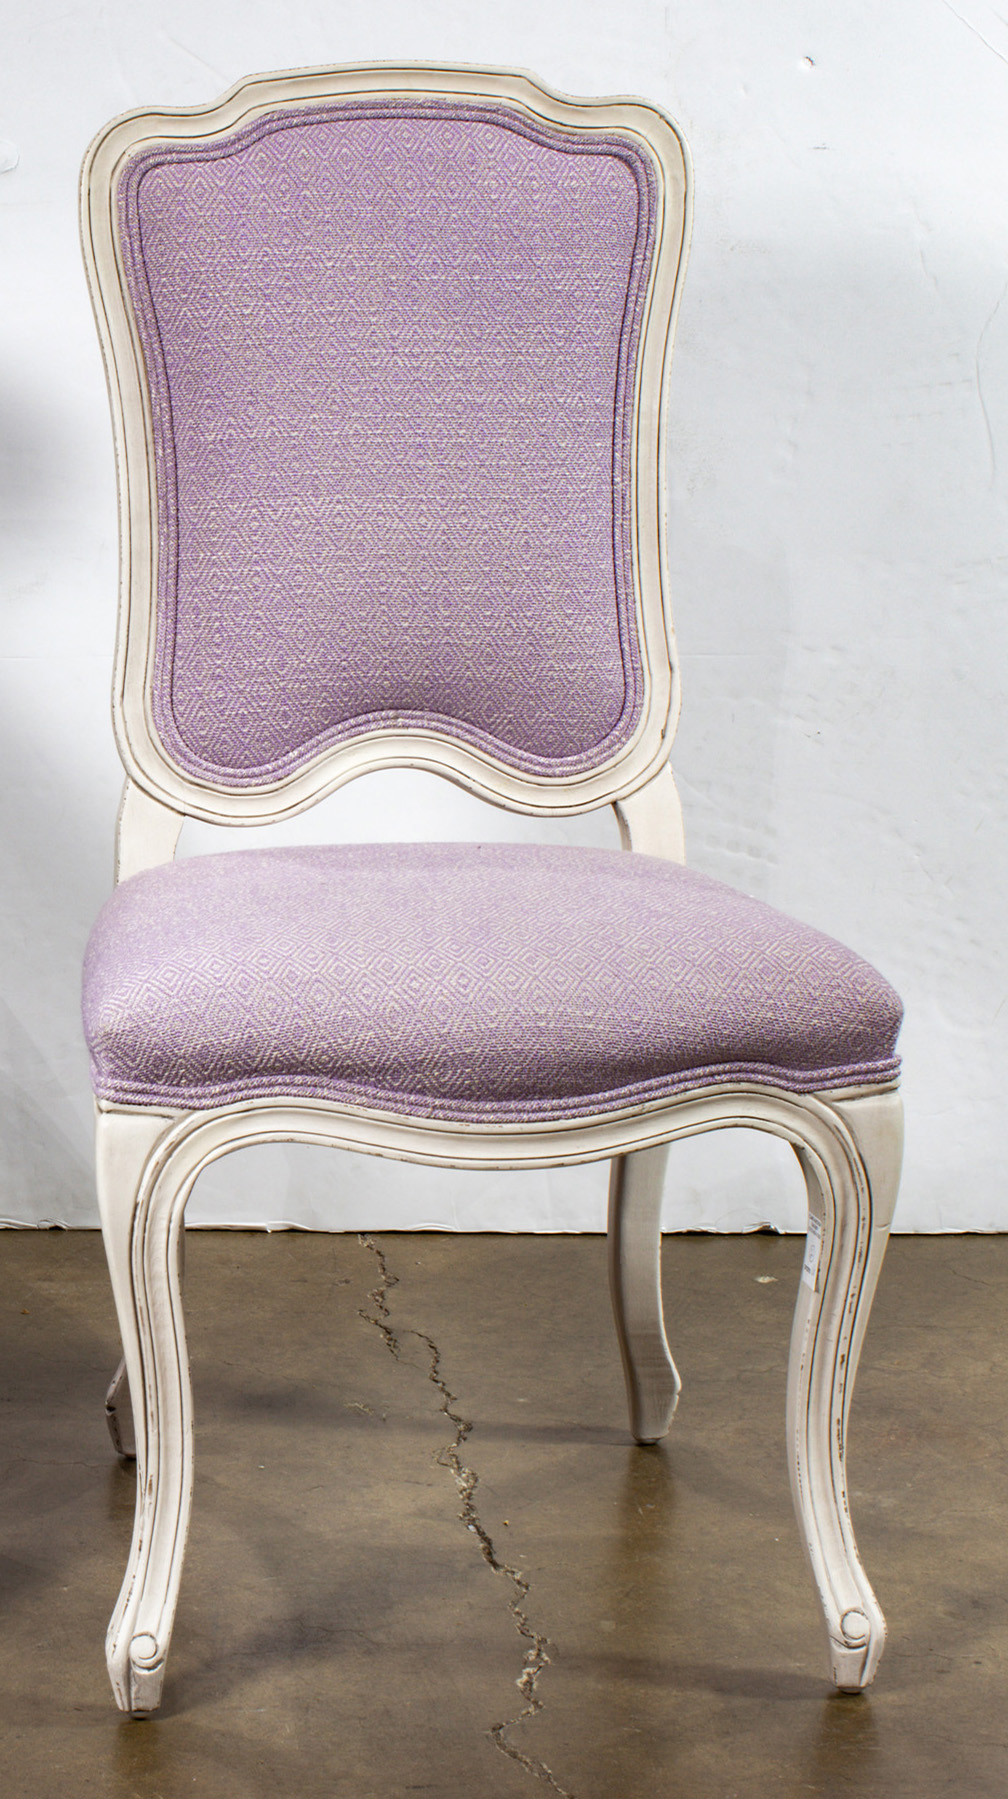 FRENCH PROVINCIAL STYLE SIDE CHAIR